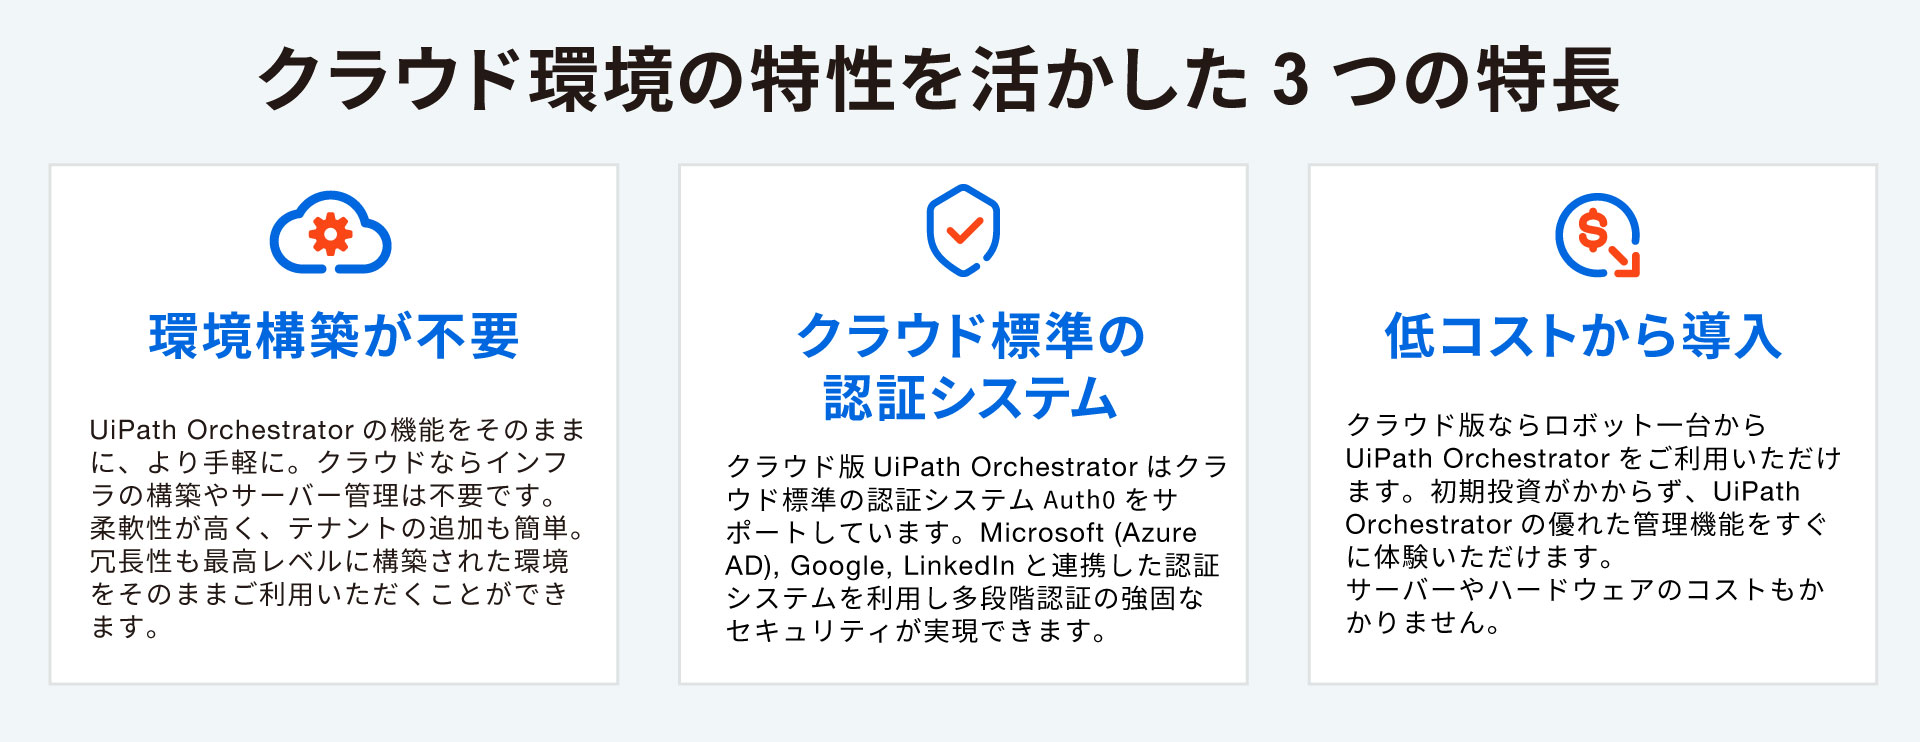 uipath-orchestrator-video-series_3